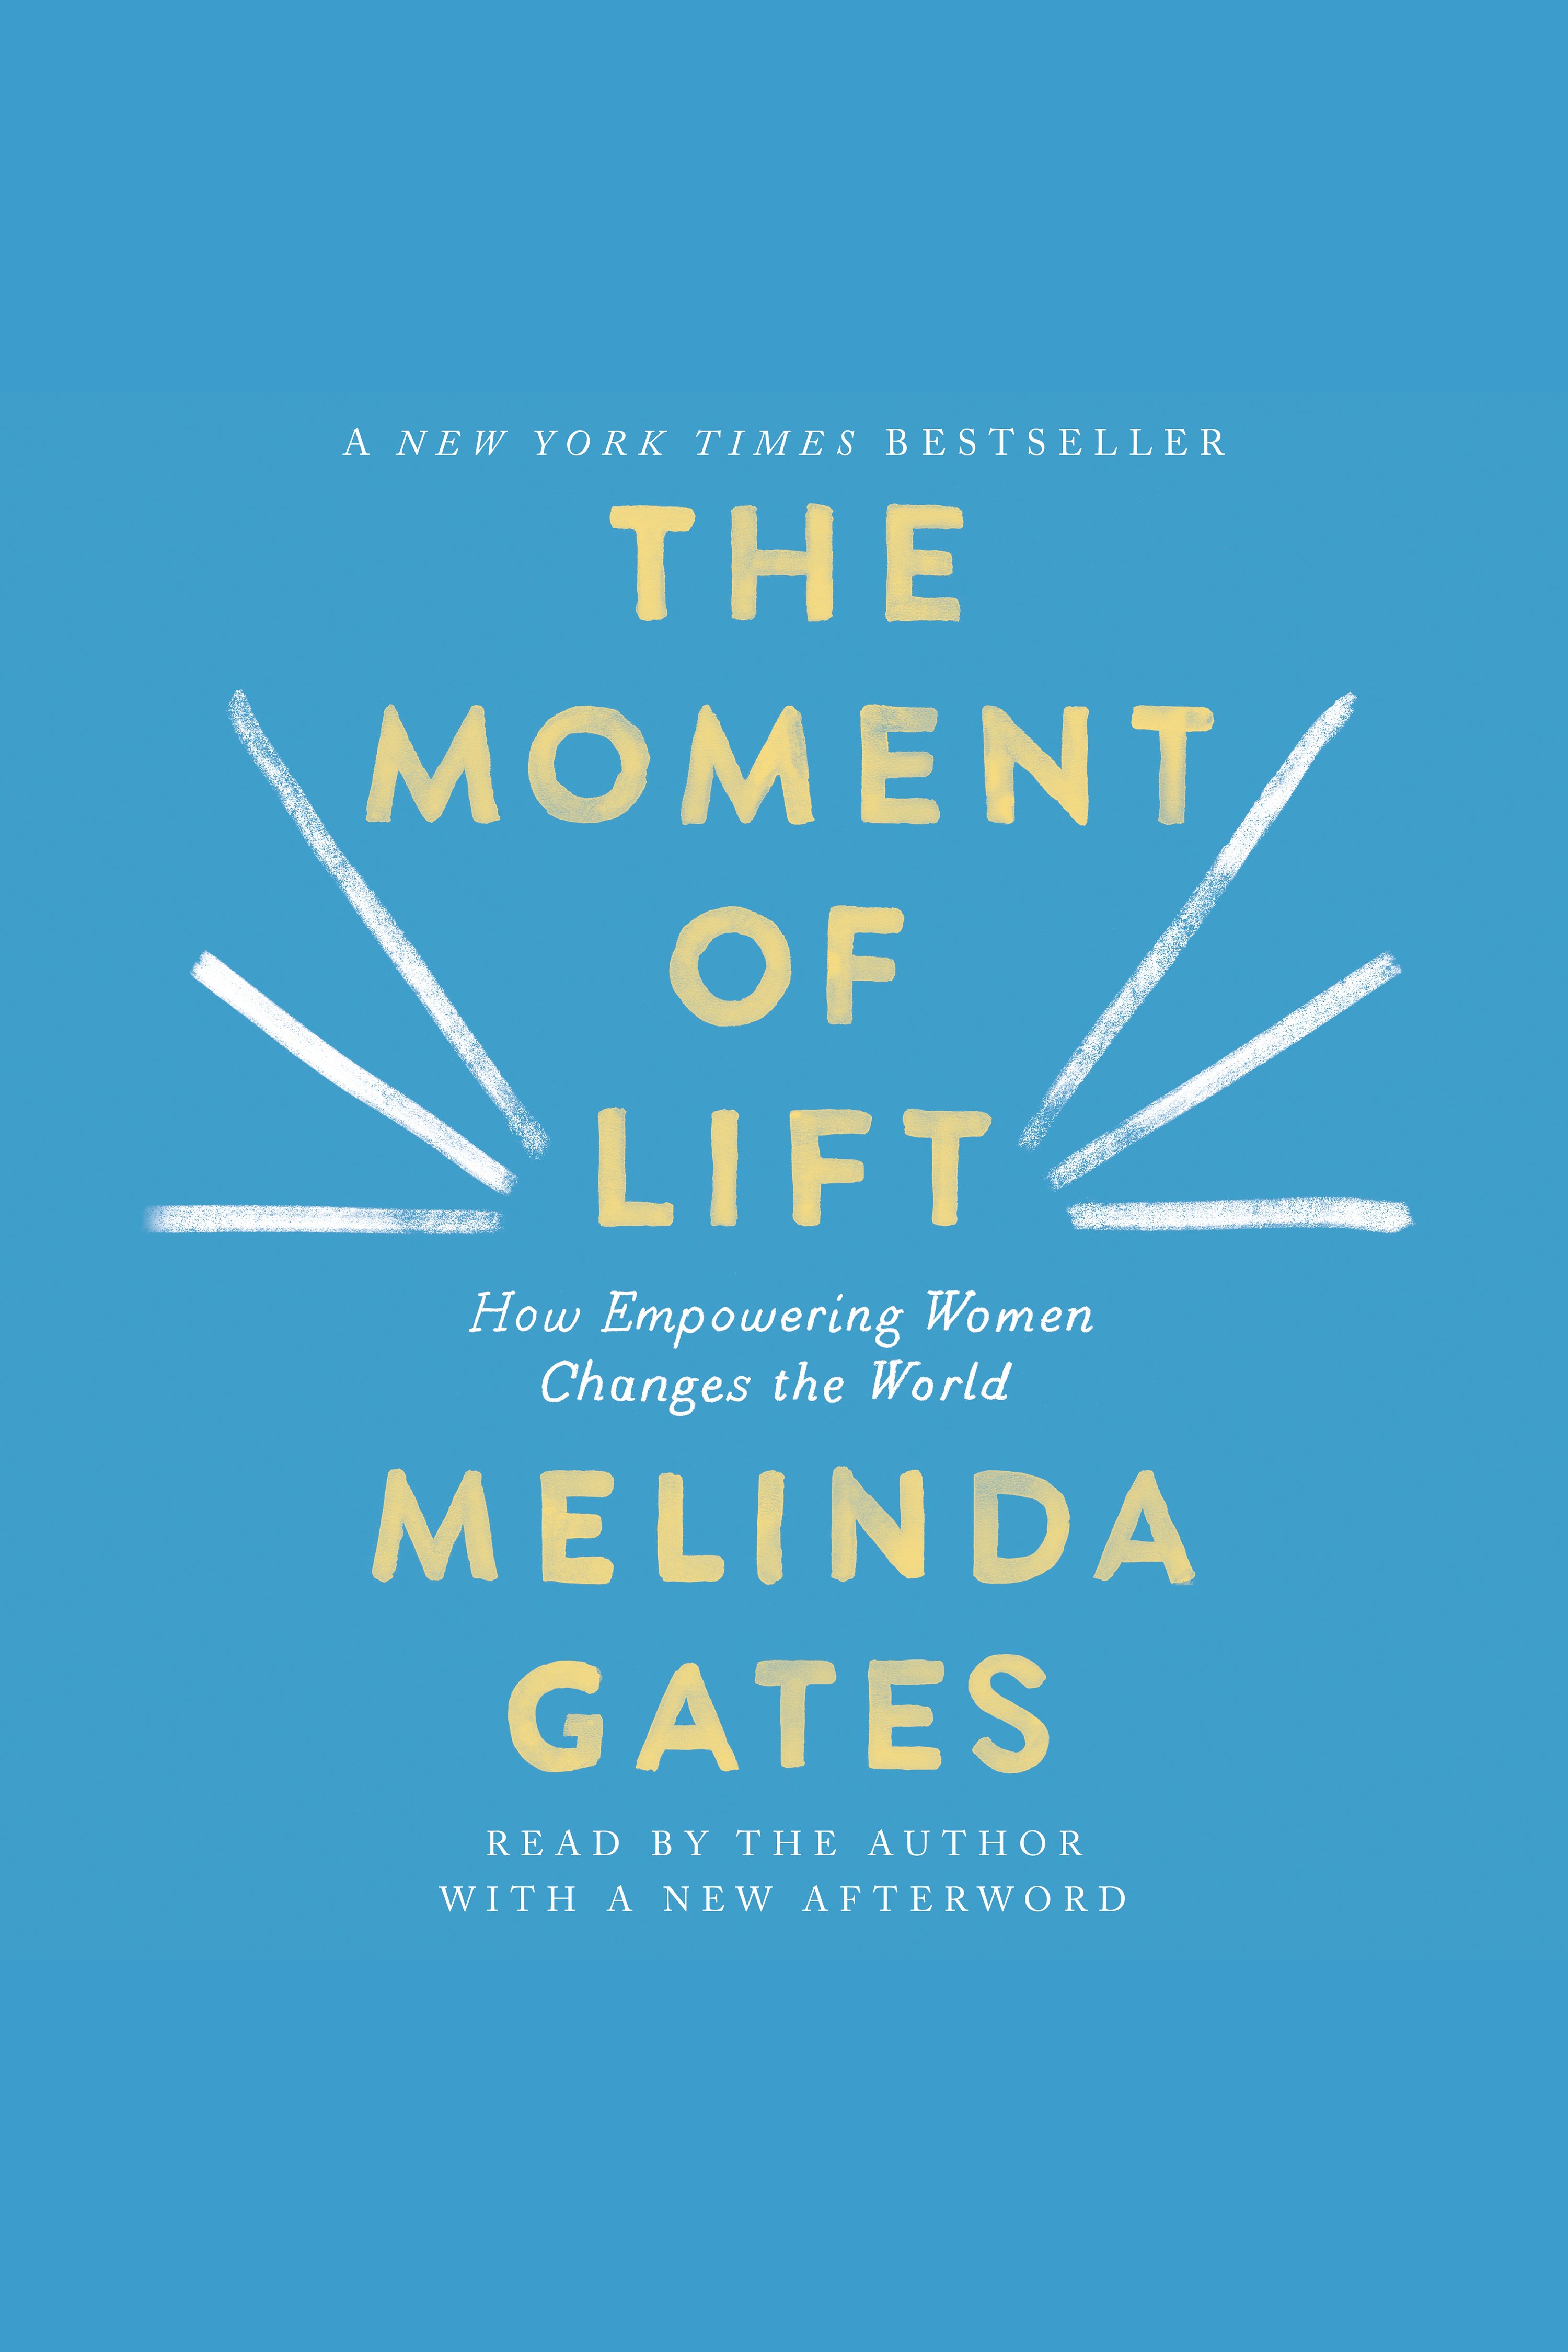 Image de couverture de The Moment of Lift [electronic resource] : How Empowering Women Changes the World